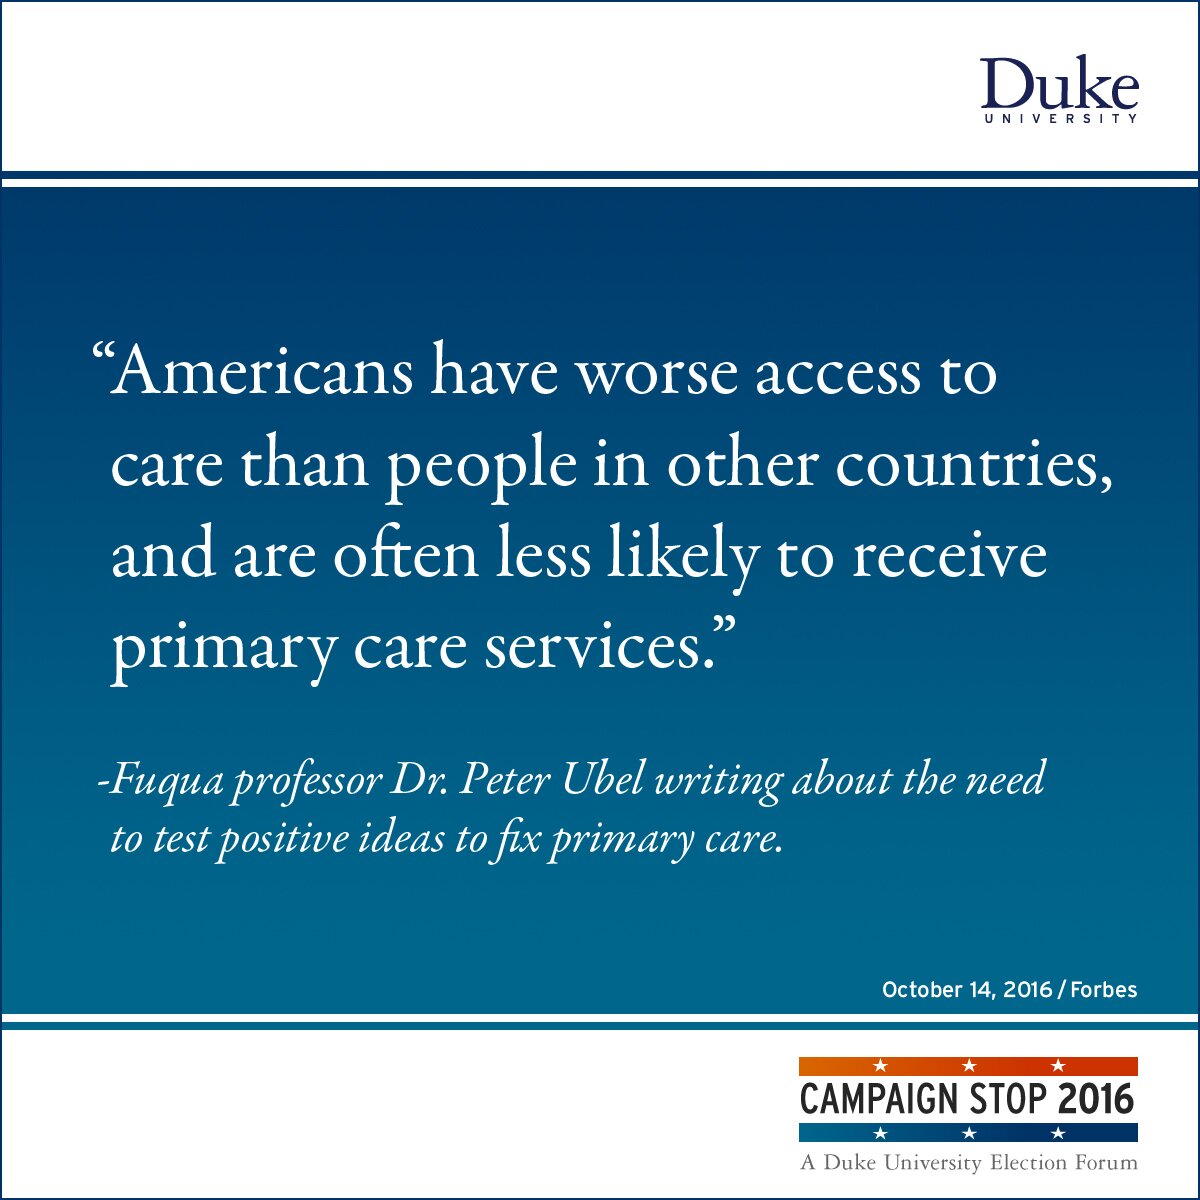 “Americans have worse access to care than people in other countries, and are often less likely to receive primary care services.” -Fuqua professor Dr. Peter Ubel writing about the need to test positive ideas to fix primary care.